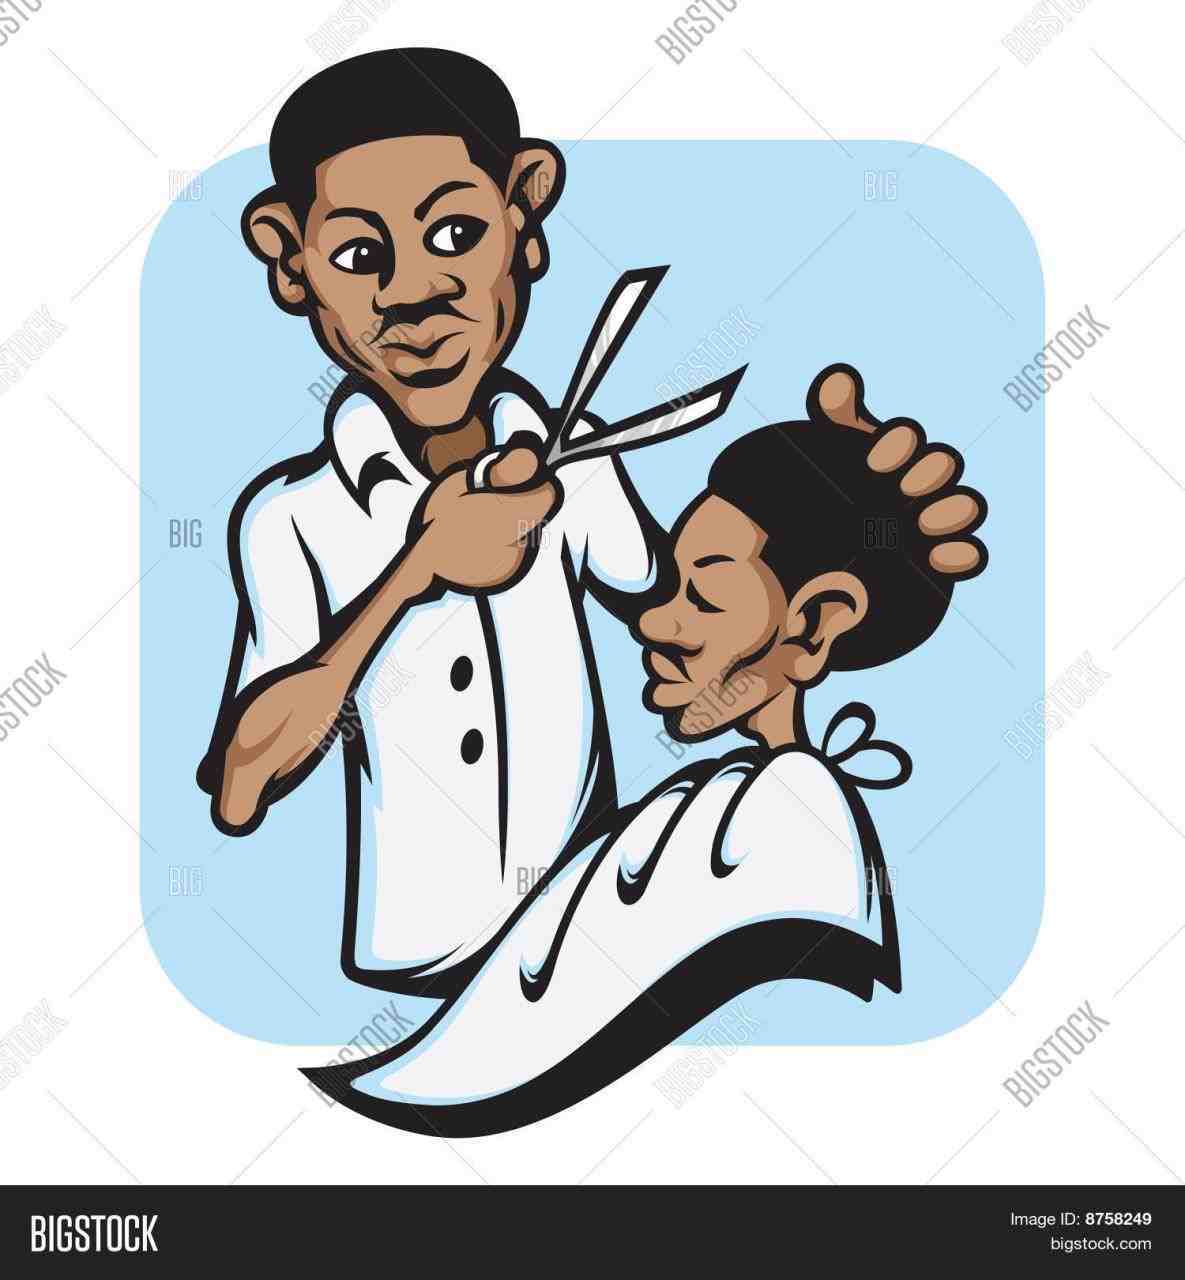 1196 Barber free clipart.